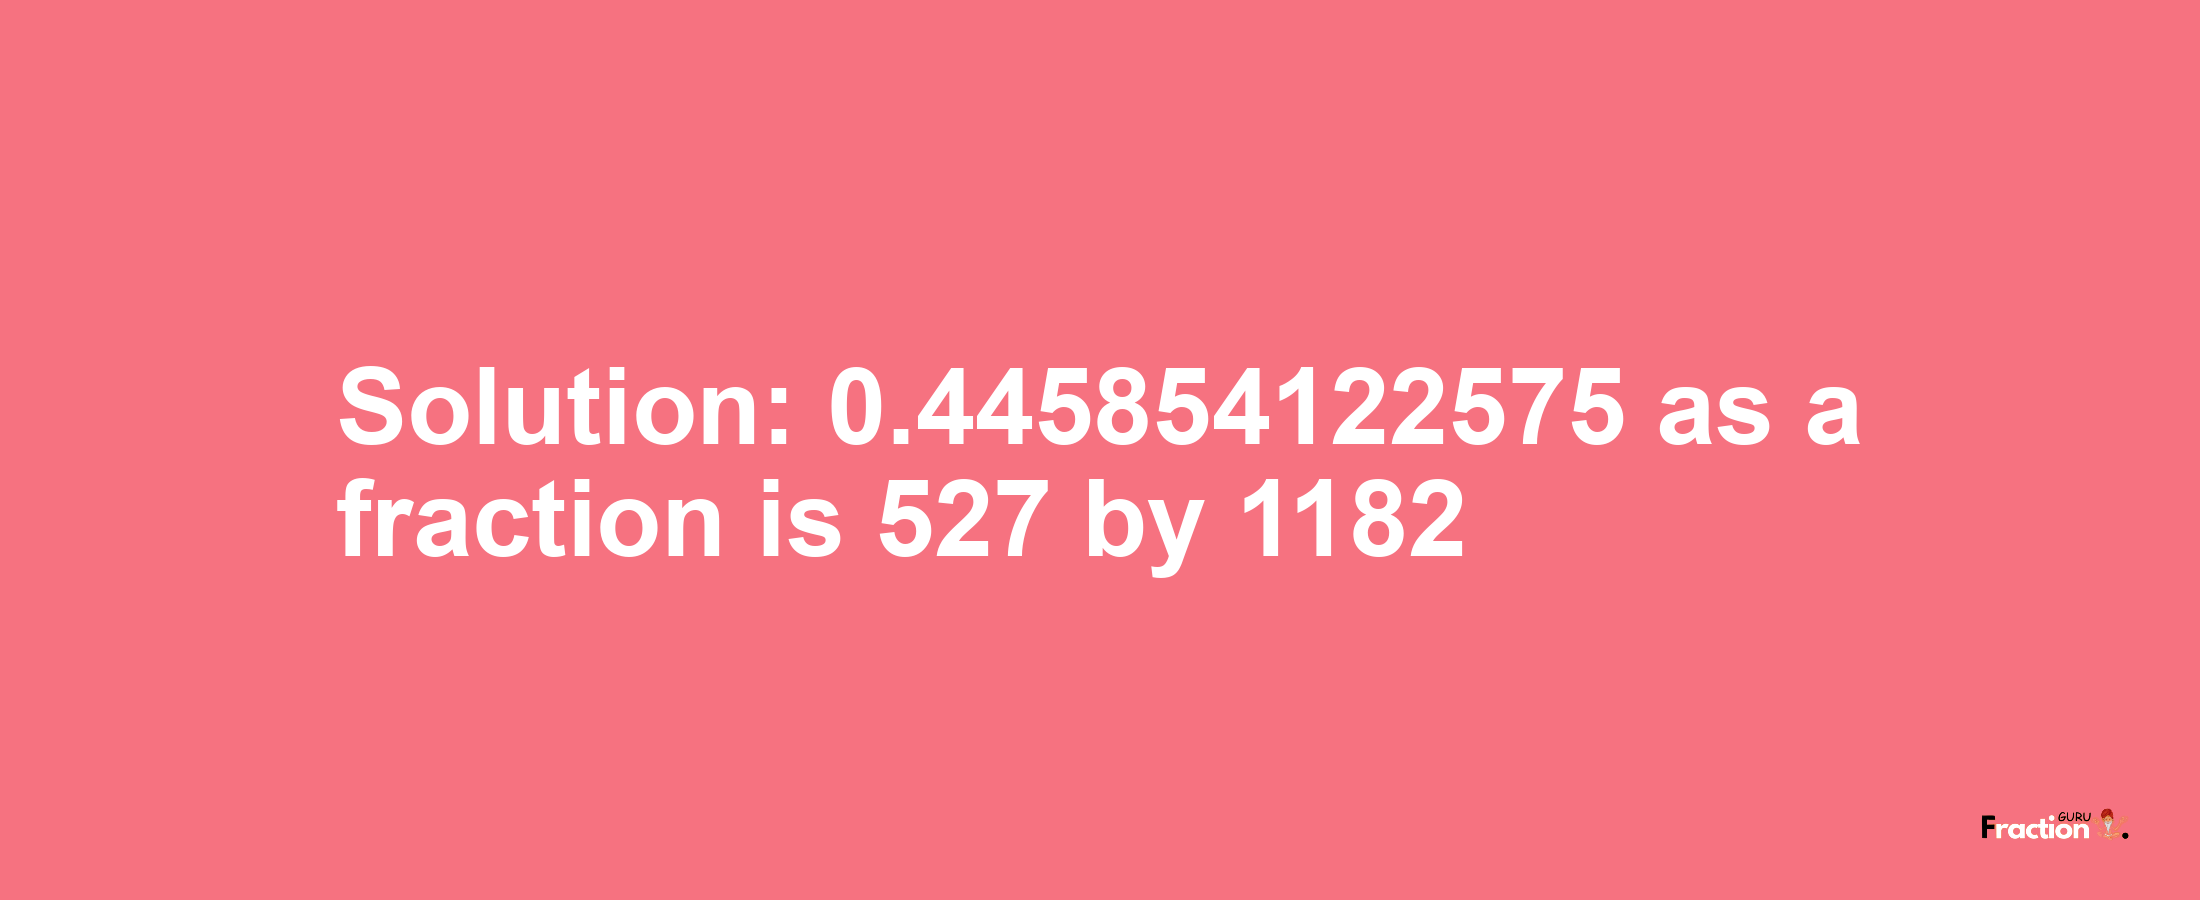 Solution:0.445854122575 as a fraction is 527/1182